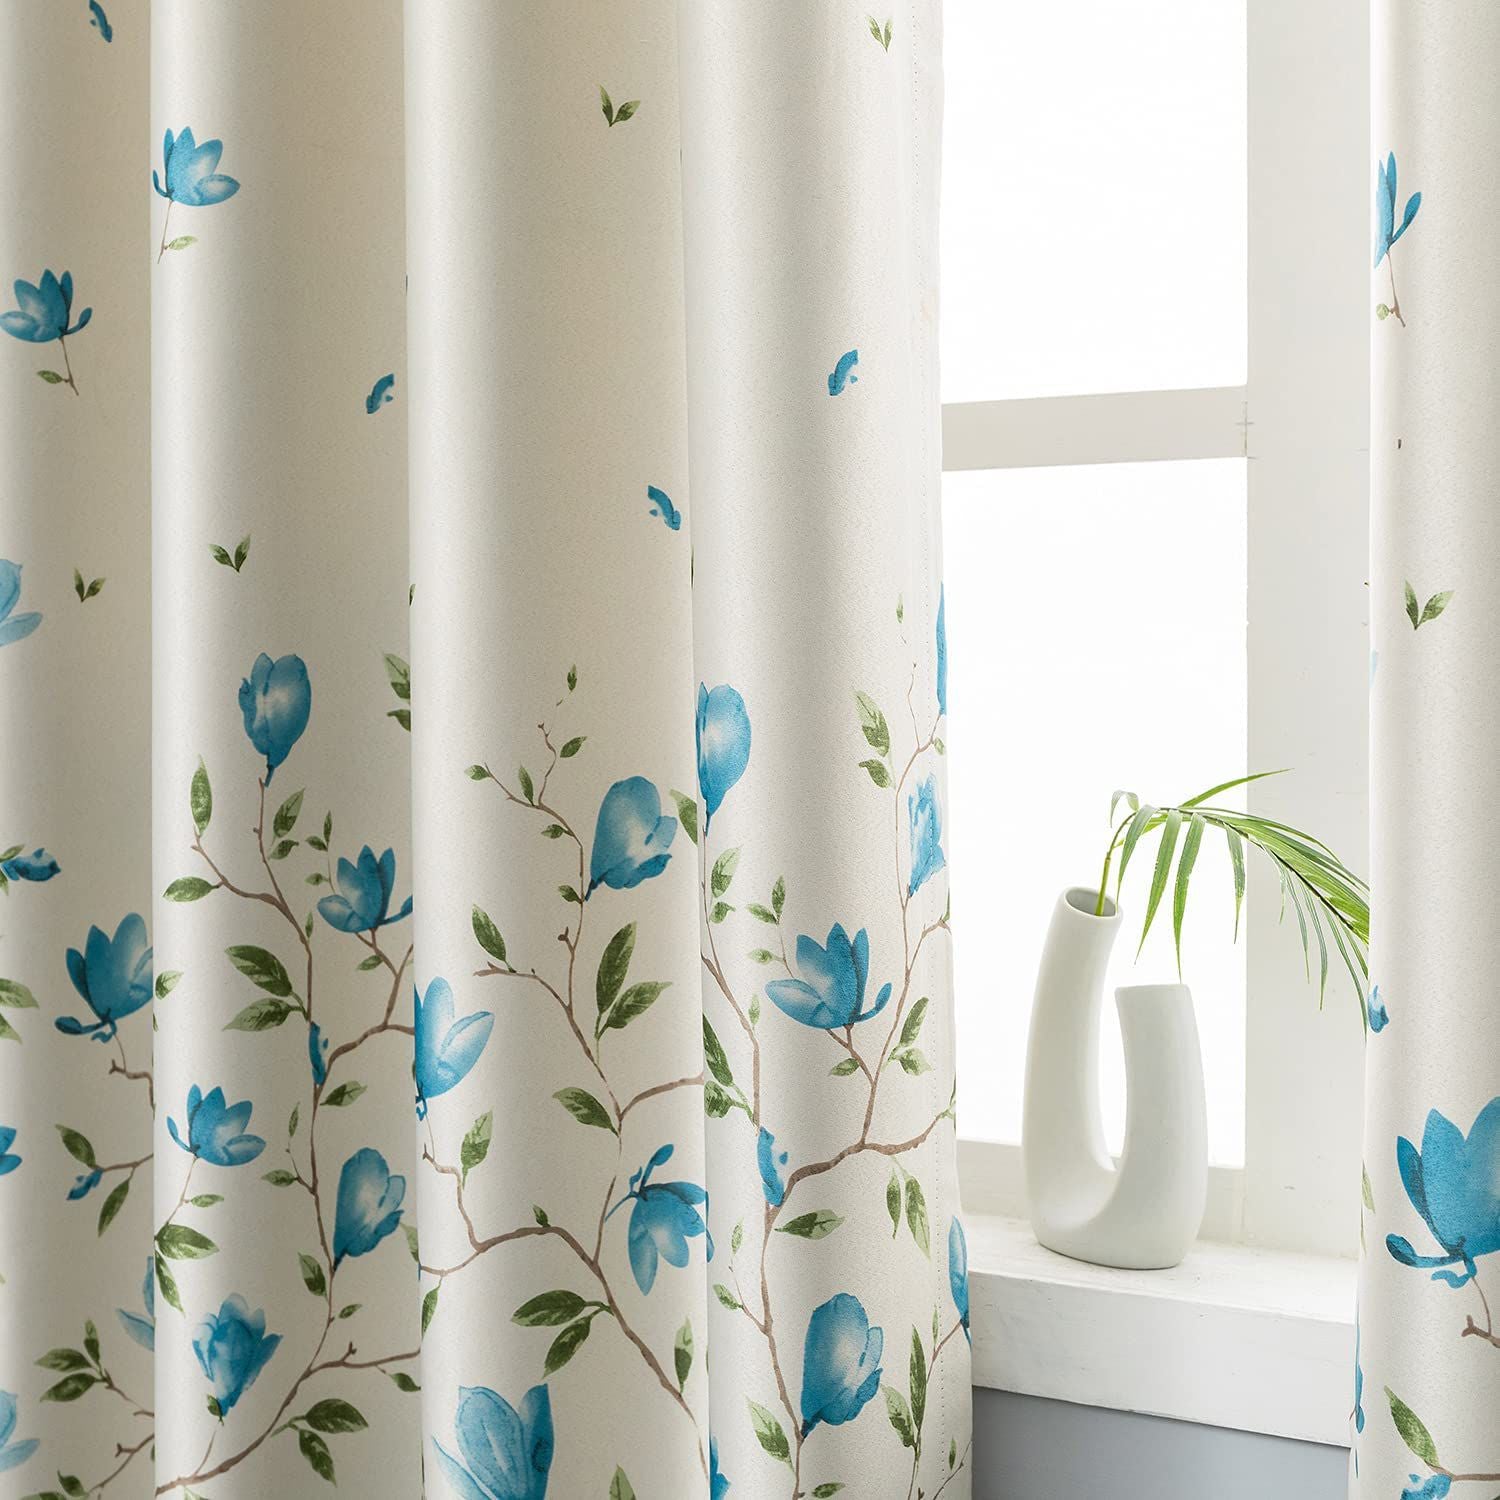 5 Things to Look for When Shopping for Premium Sheer Curtains